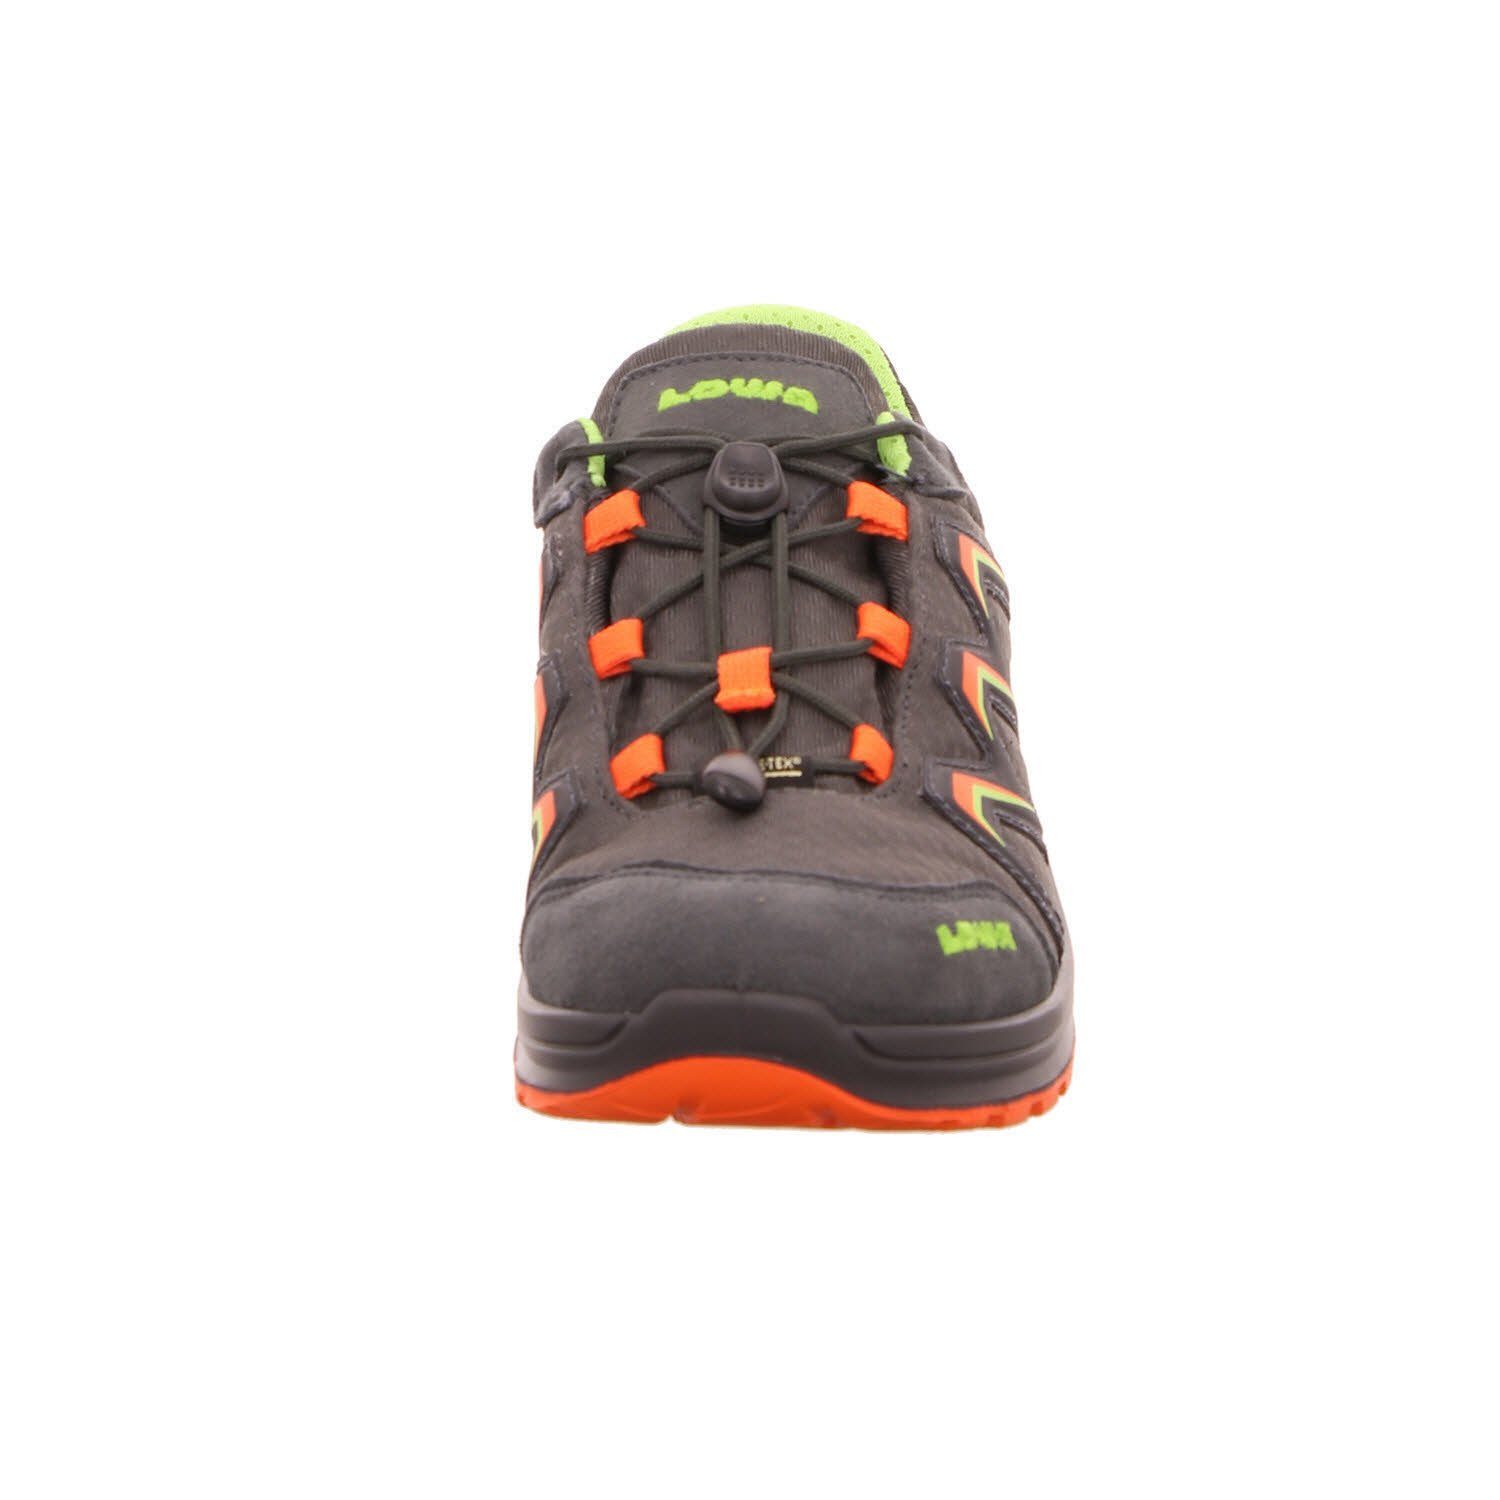 Lowa GRAPHIT/FLAME Outdoorschuh